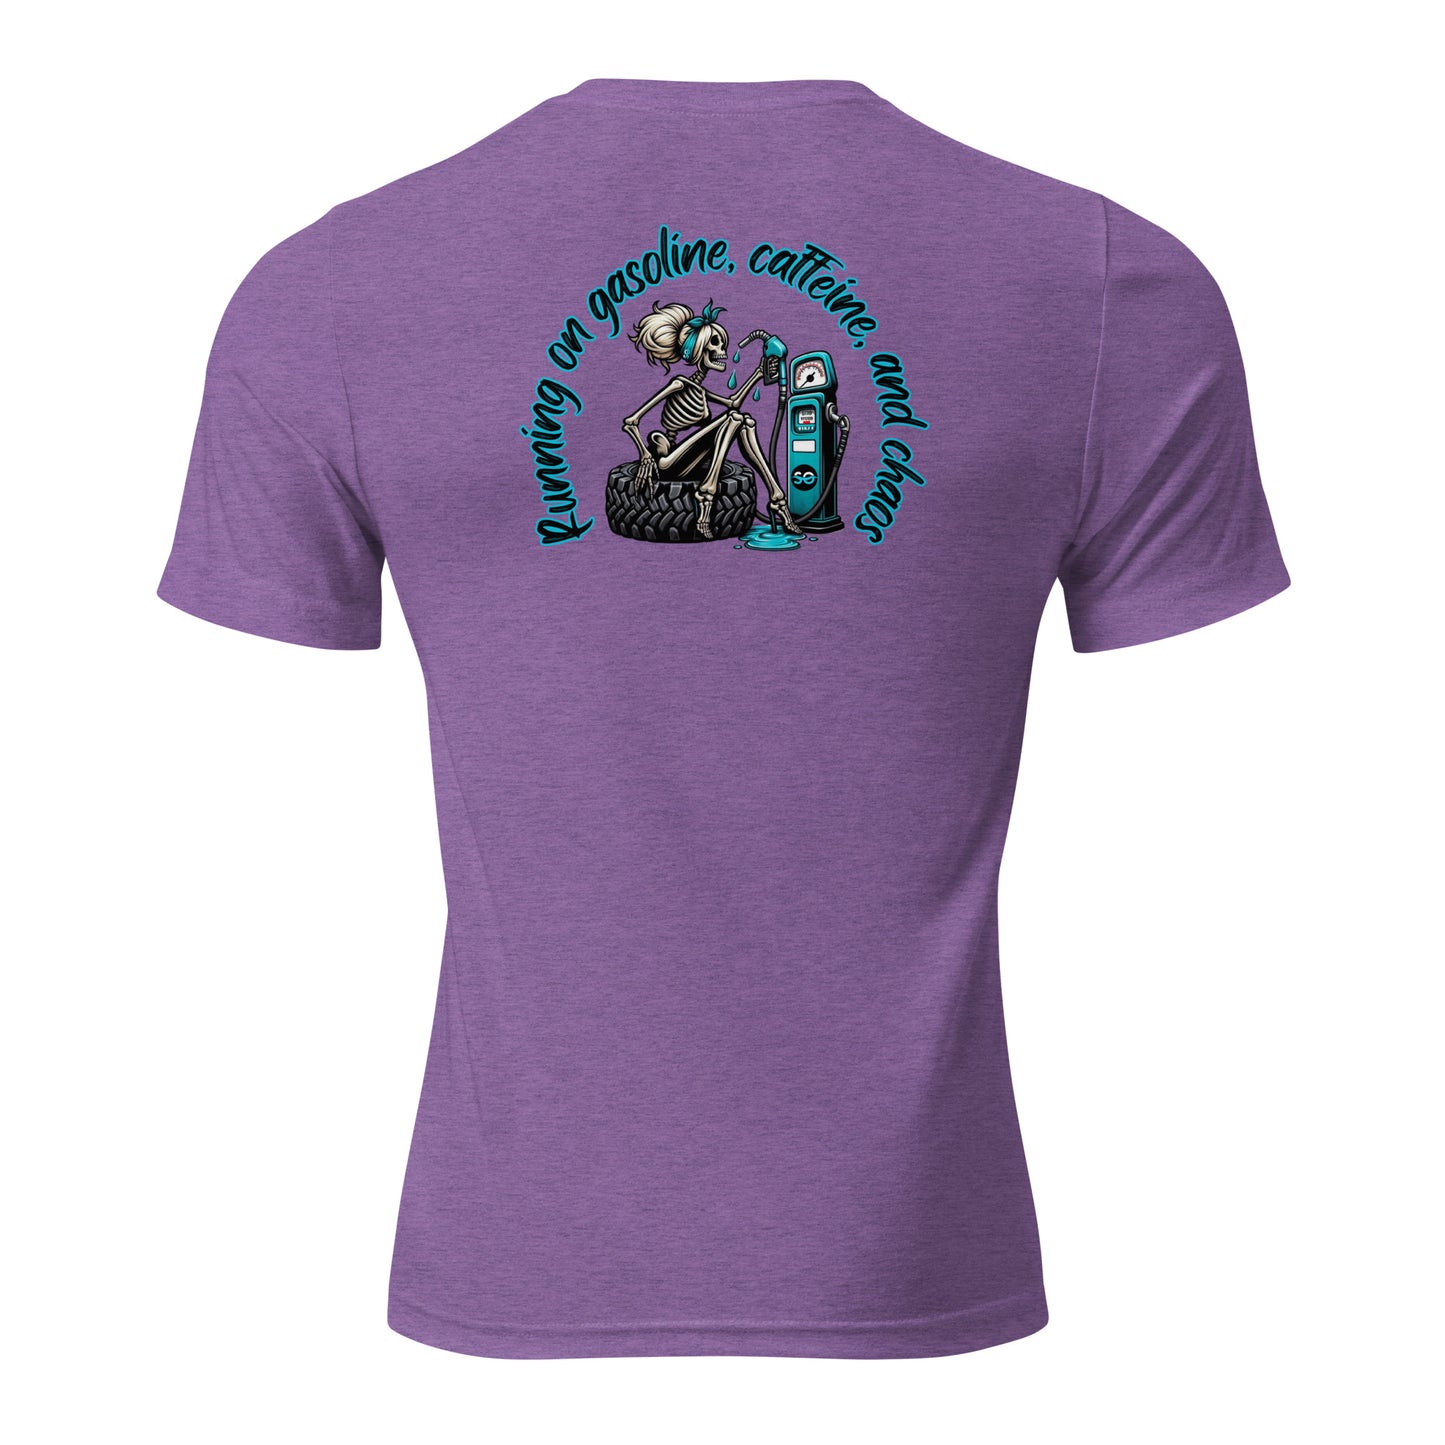 a purple shirt with a skeleton riding a snowboard